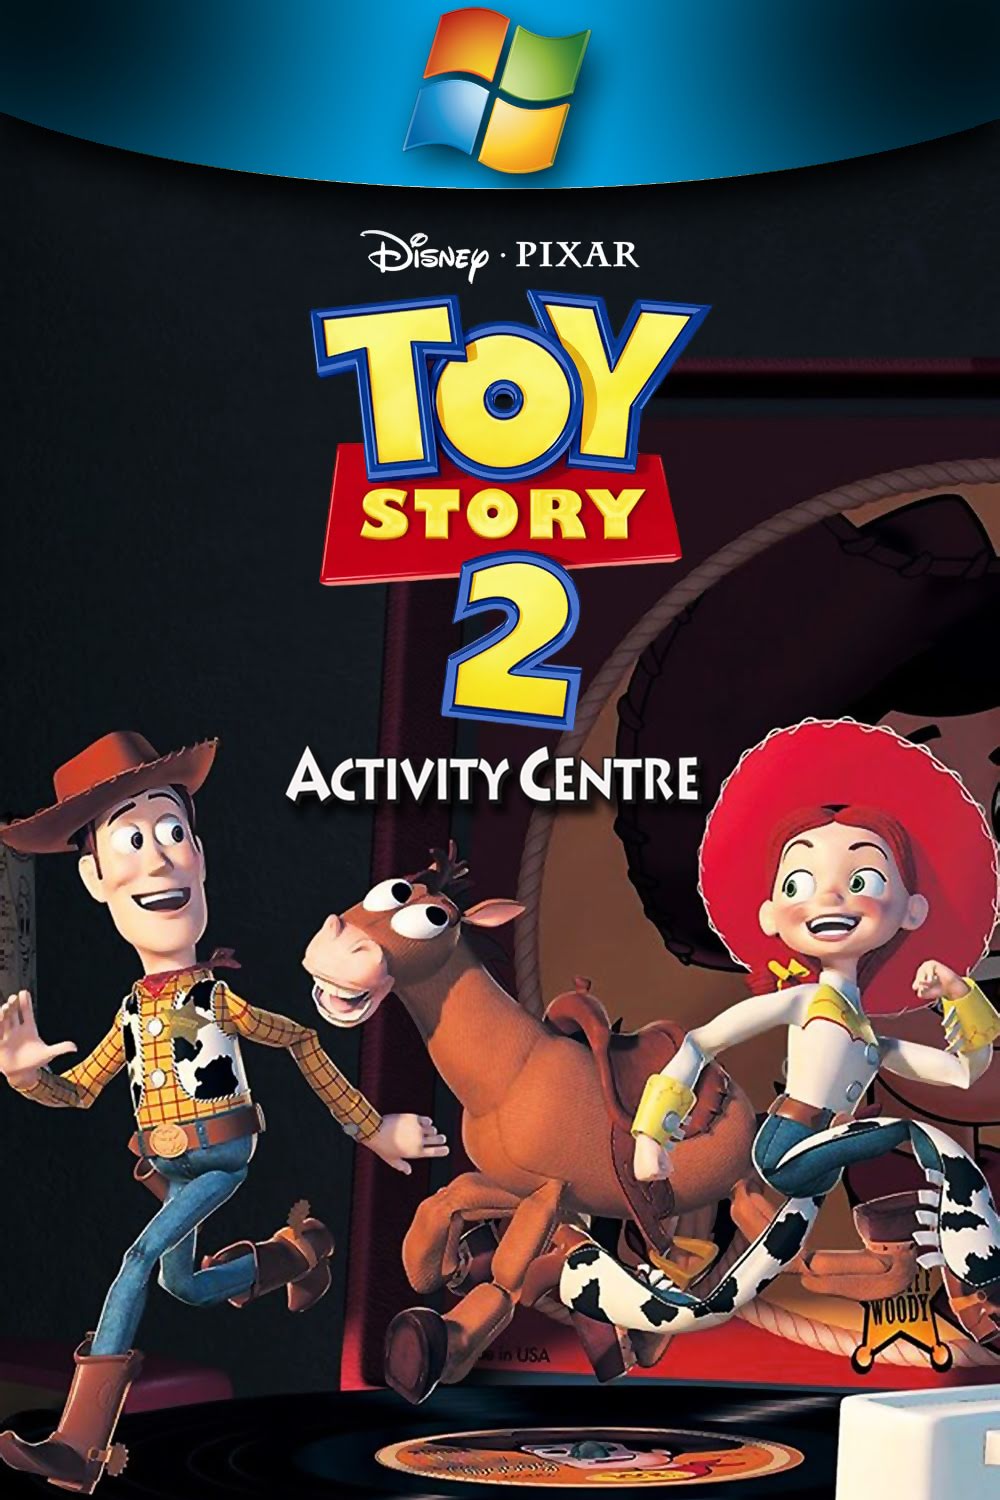 The Collection Chamber Disney Pixar Toy Story 2 Activity Centre